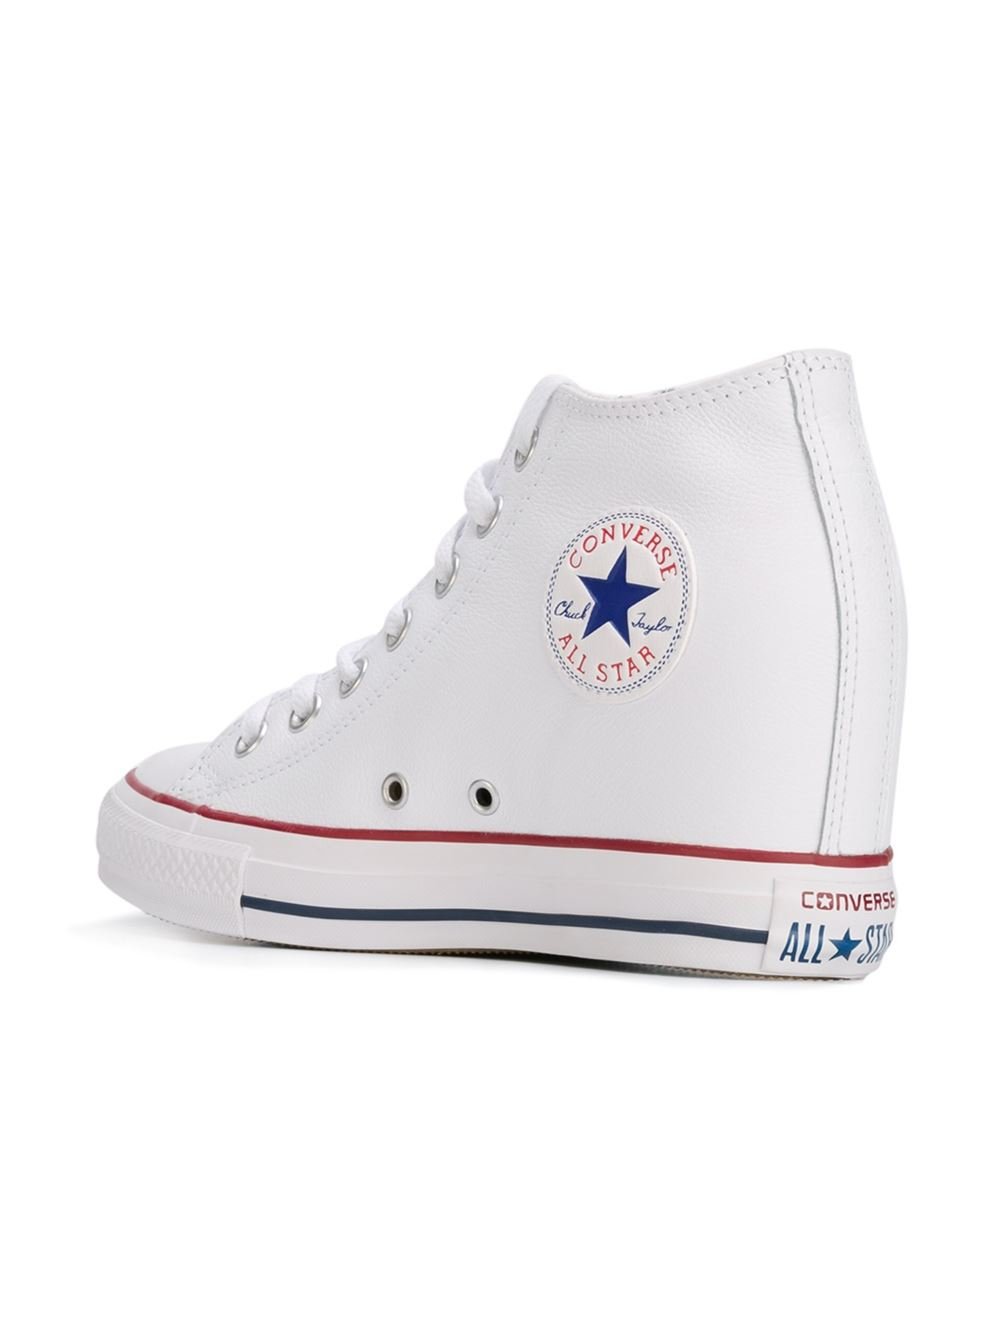 interval Meget Bi Converse 'chuck Taylor All Star Lux Wedge' Sneakers in White | Lyst